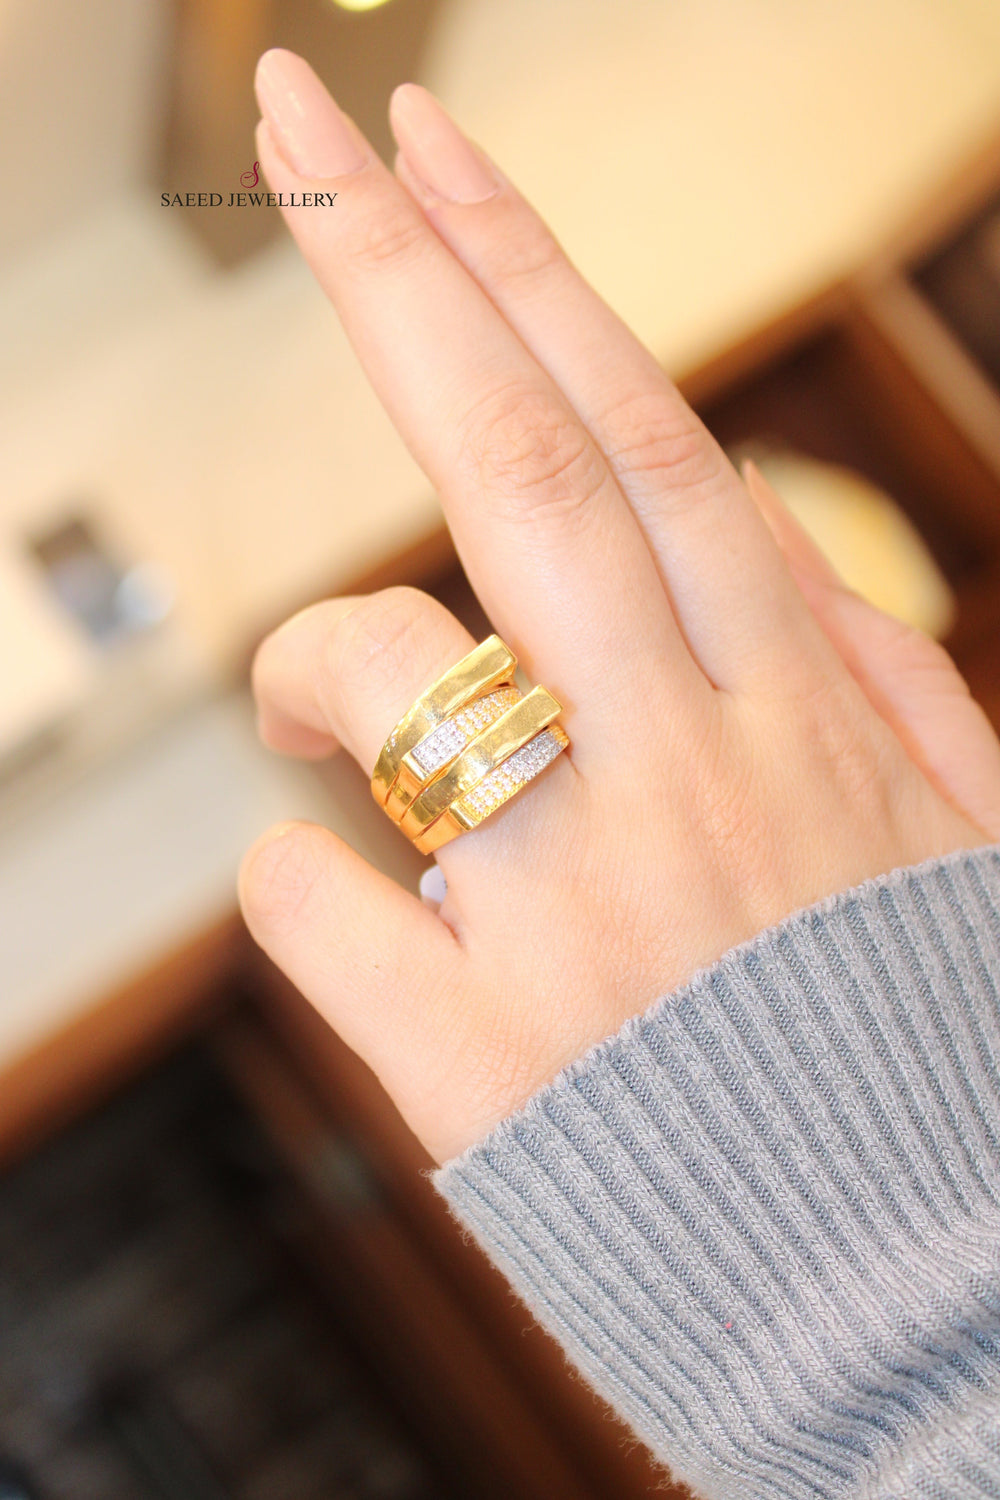 21K Fancy Ring Made of 21K Yellow Gold by Saeed Jewelry-15018